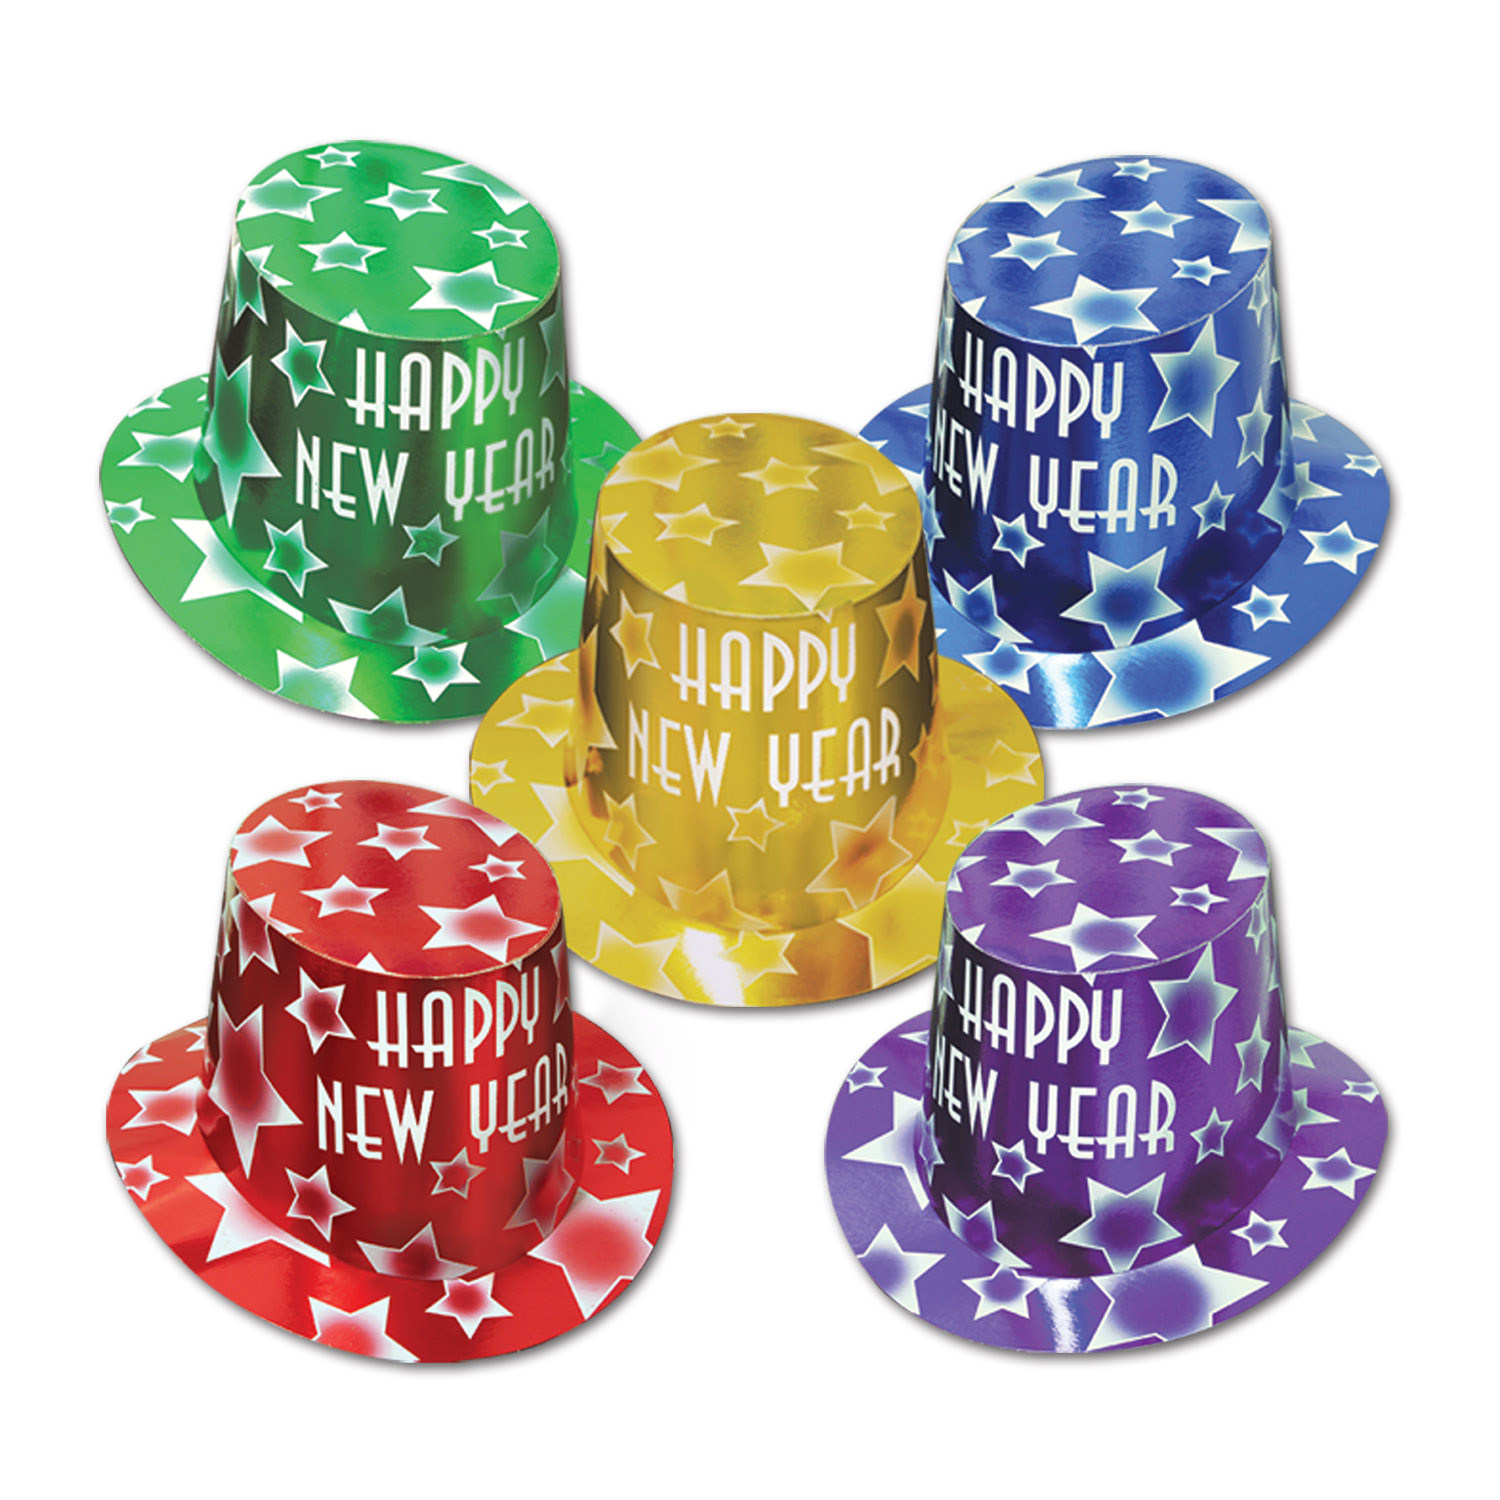 Cardstock hi-hats in red, green, yellow, blue and purple with white happy new year lettering and stars. 